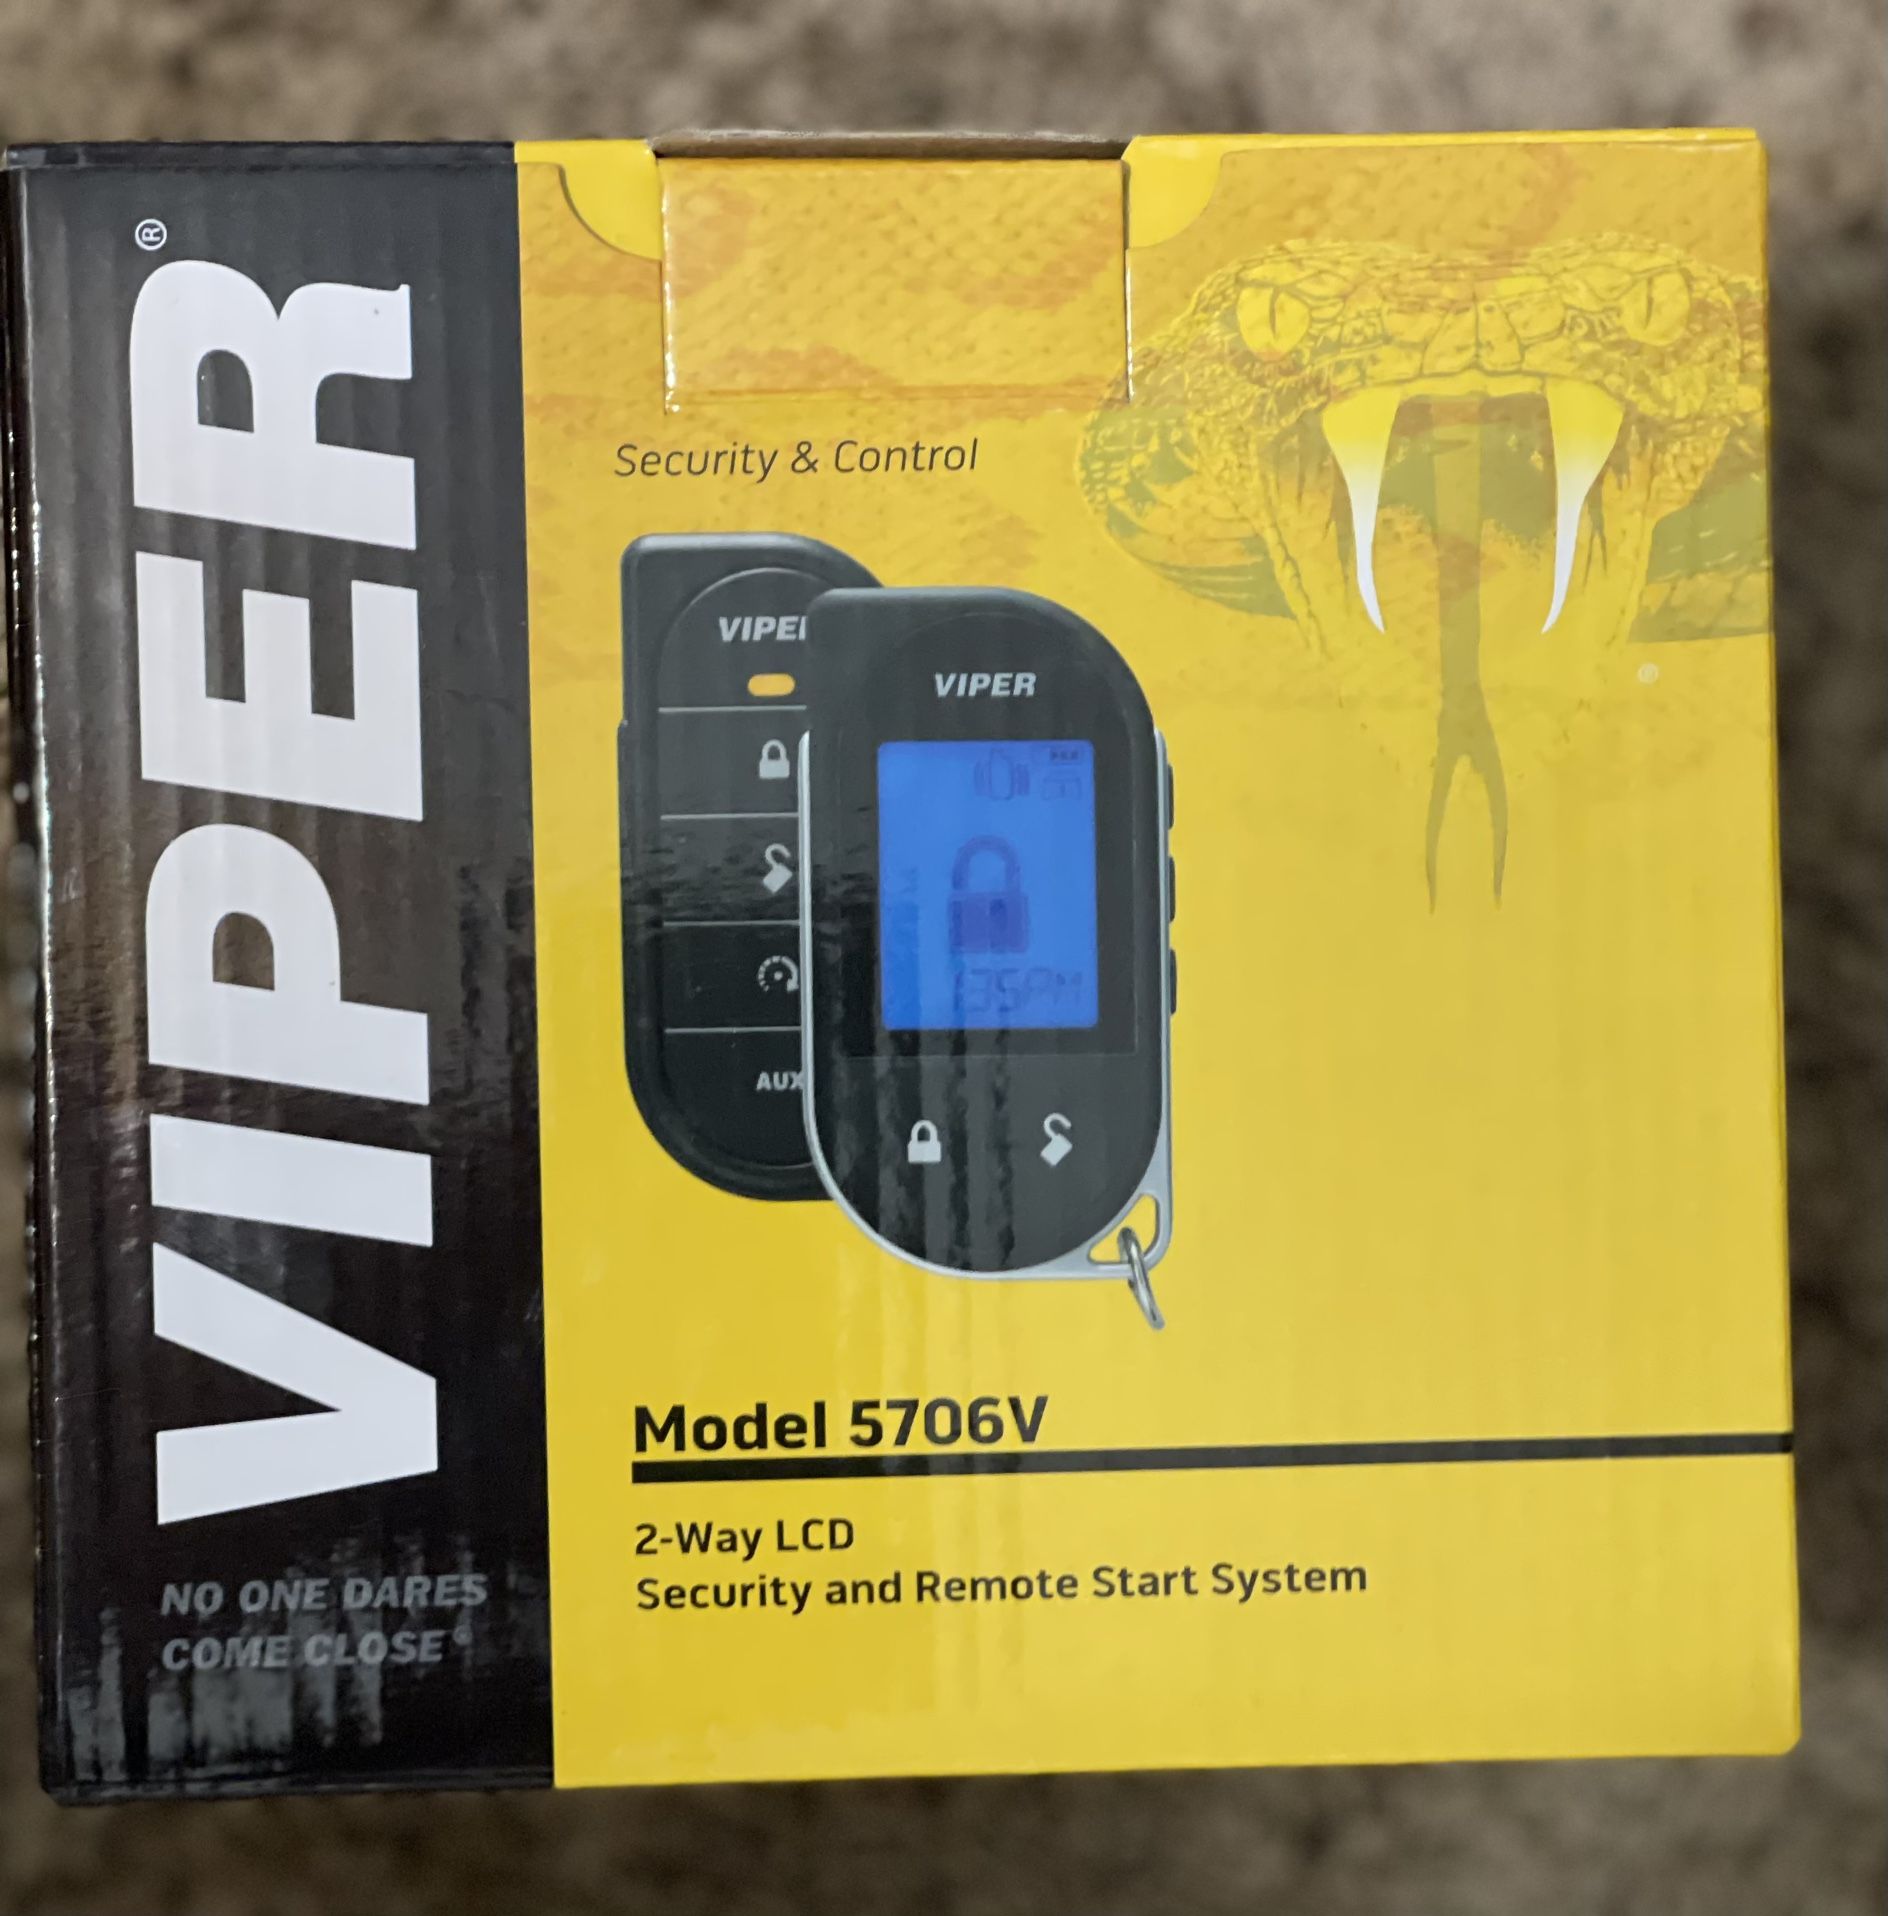 Car Alarm & Remote Start Viper 1 Mile Range With Charging Pager Remote That Notifies You Of Any Trigger Activity 